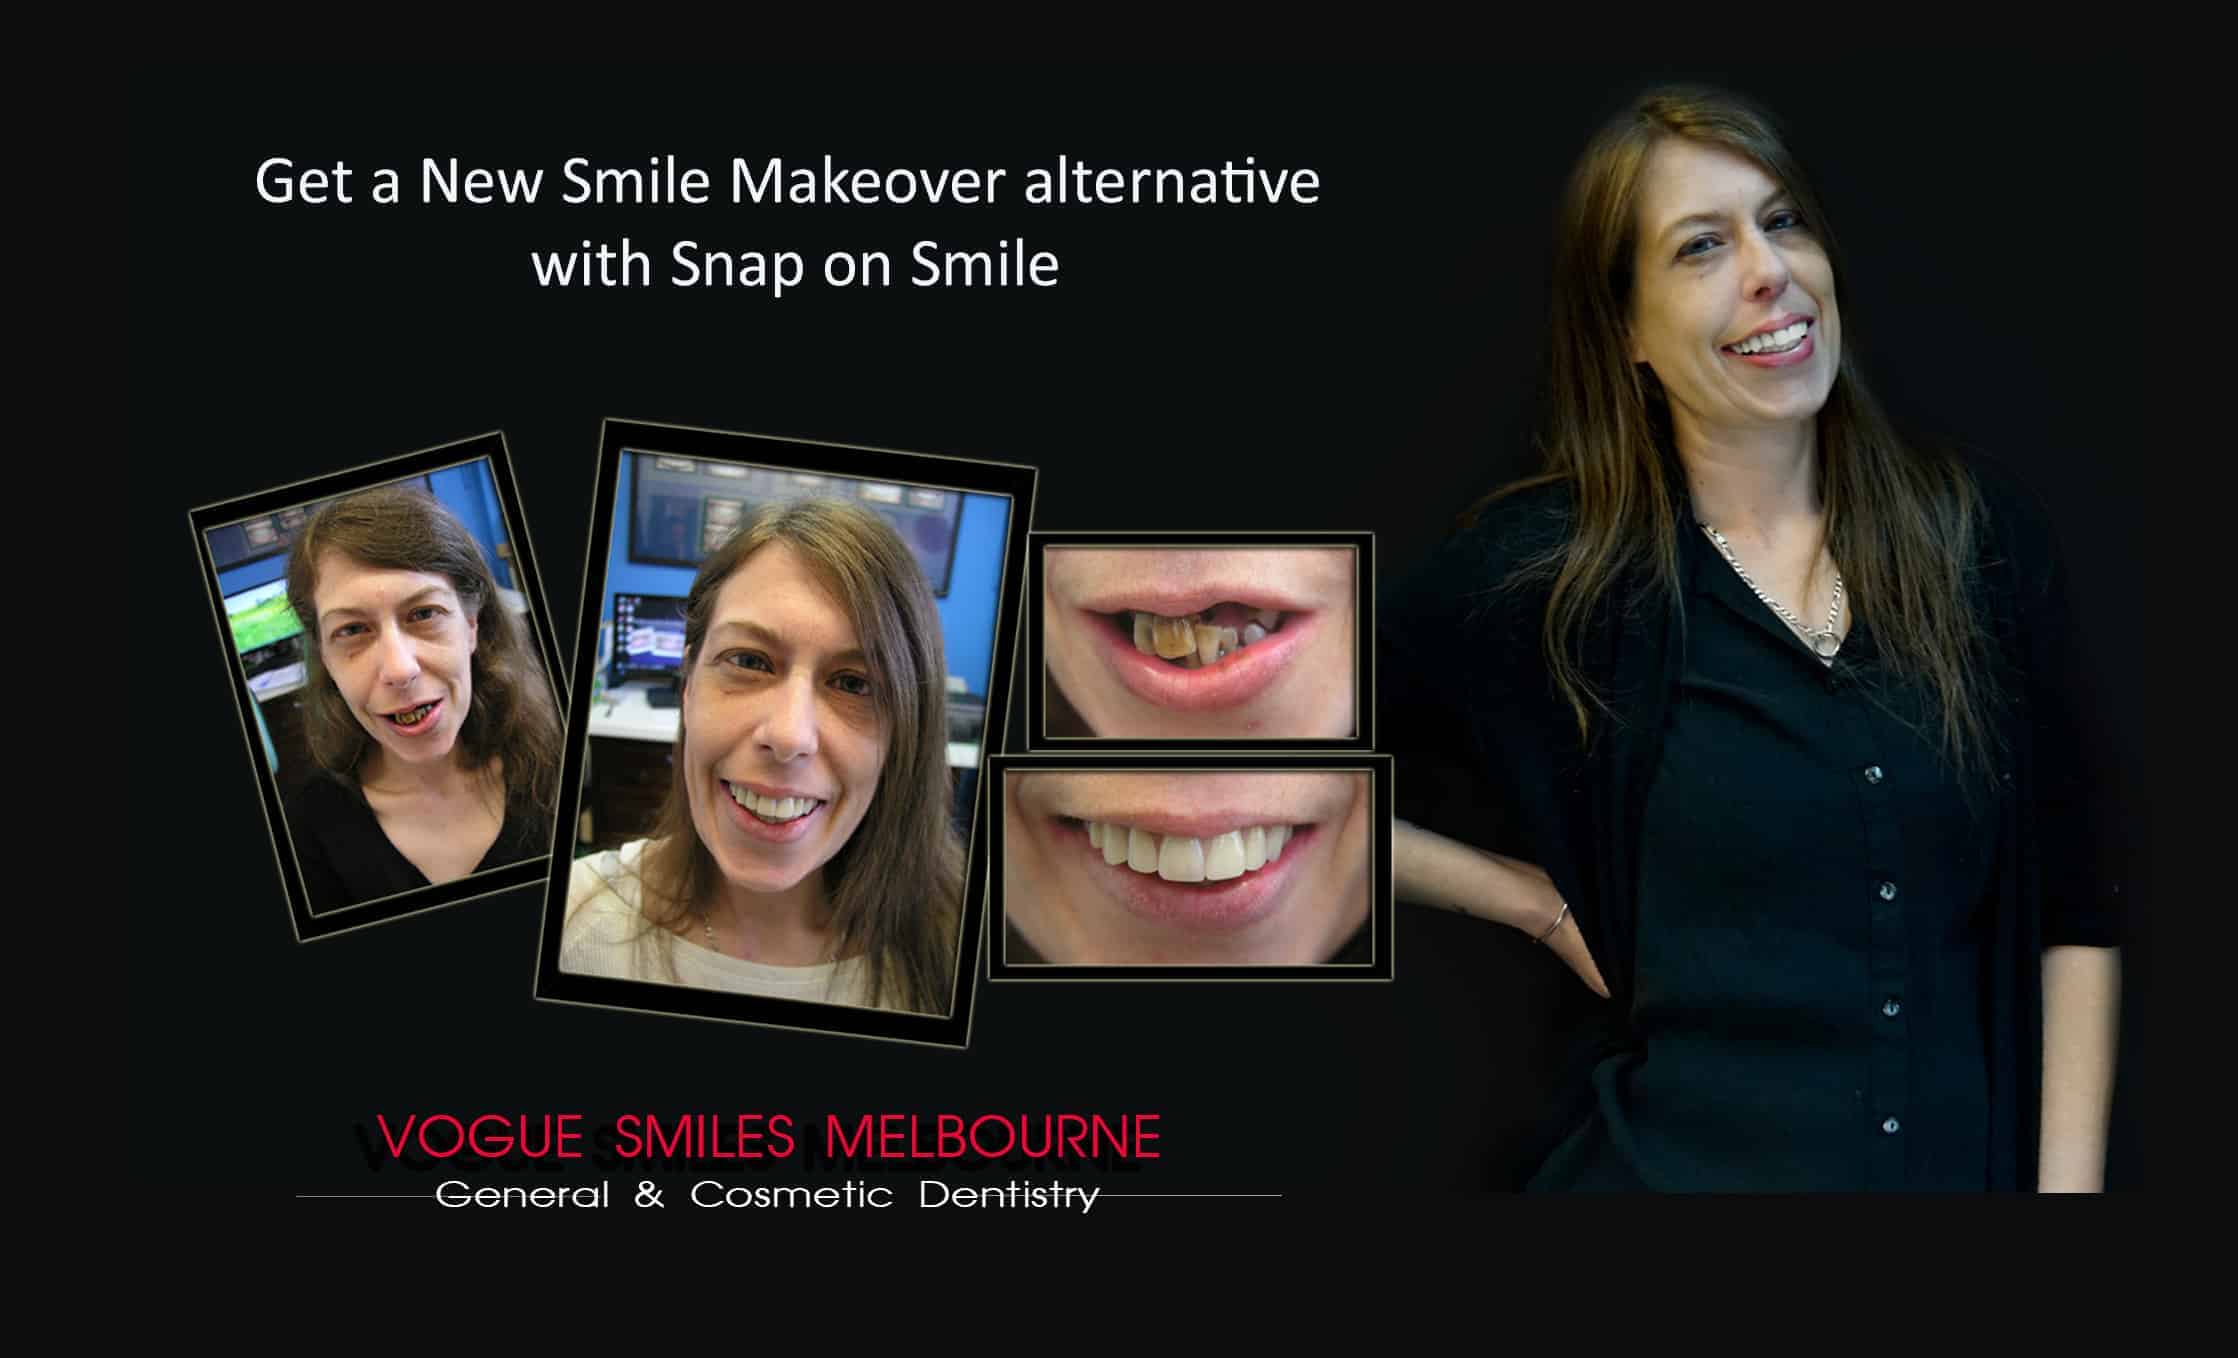 Most Affordable Way To Improve Your Smile Melbourne- CHEAPEST COSMETIC DENTISTRY SMILE MAKEOVER OPTION MELBOURNE DENTIST -Affordable Ways to Fix Your Smile and Boost Your Confidence